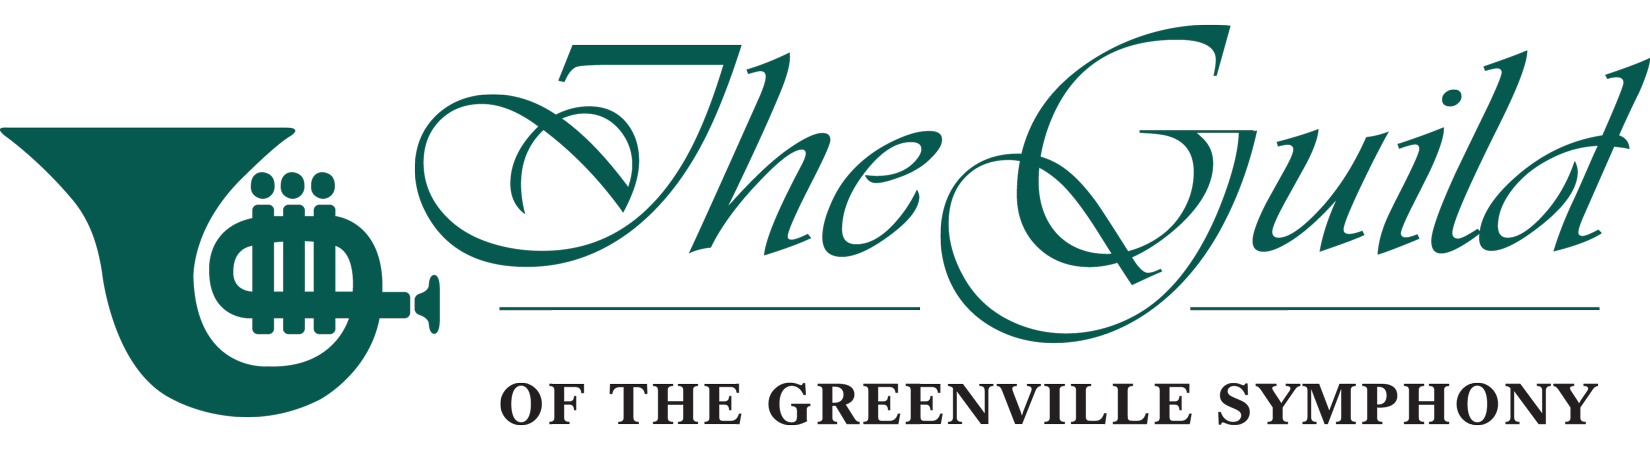 The Guild of the Greenville Symphony